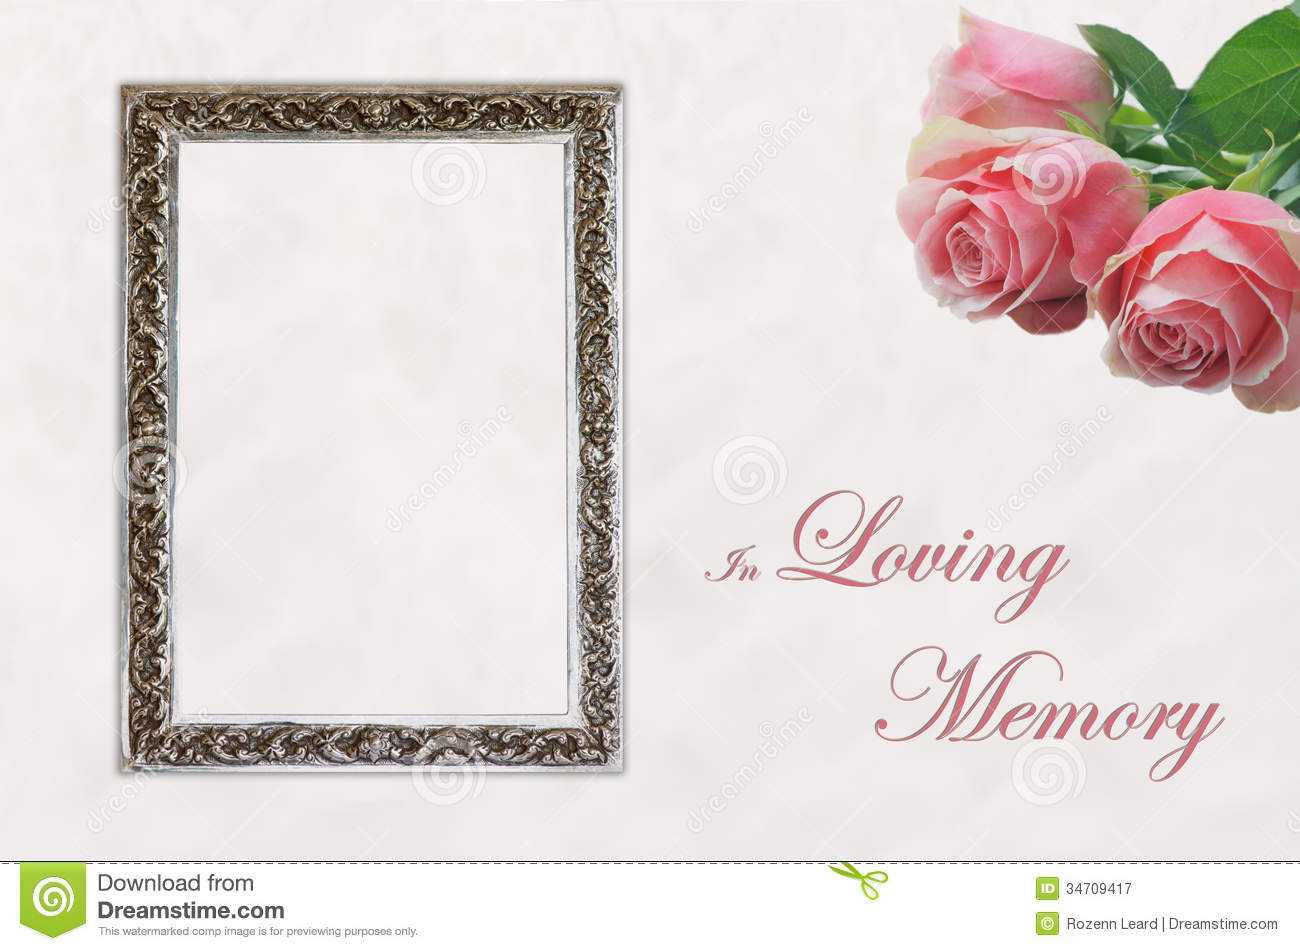 In Memory Cards Templates ] – Memory Template 4 Celebration Regarding In Memory Cards Templates